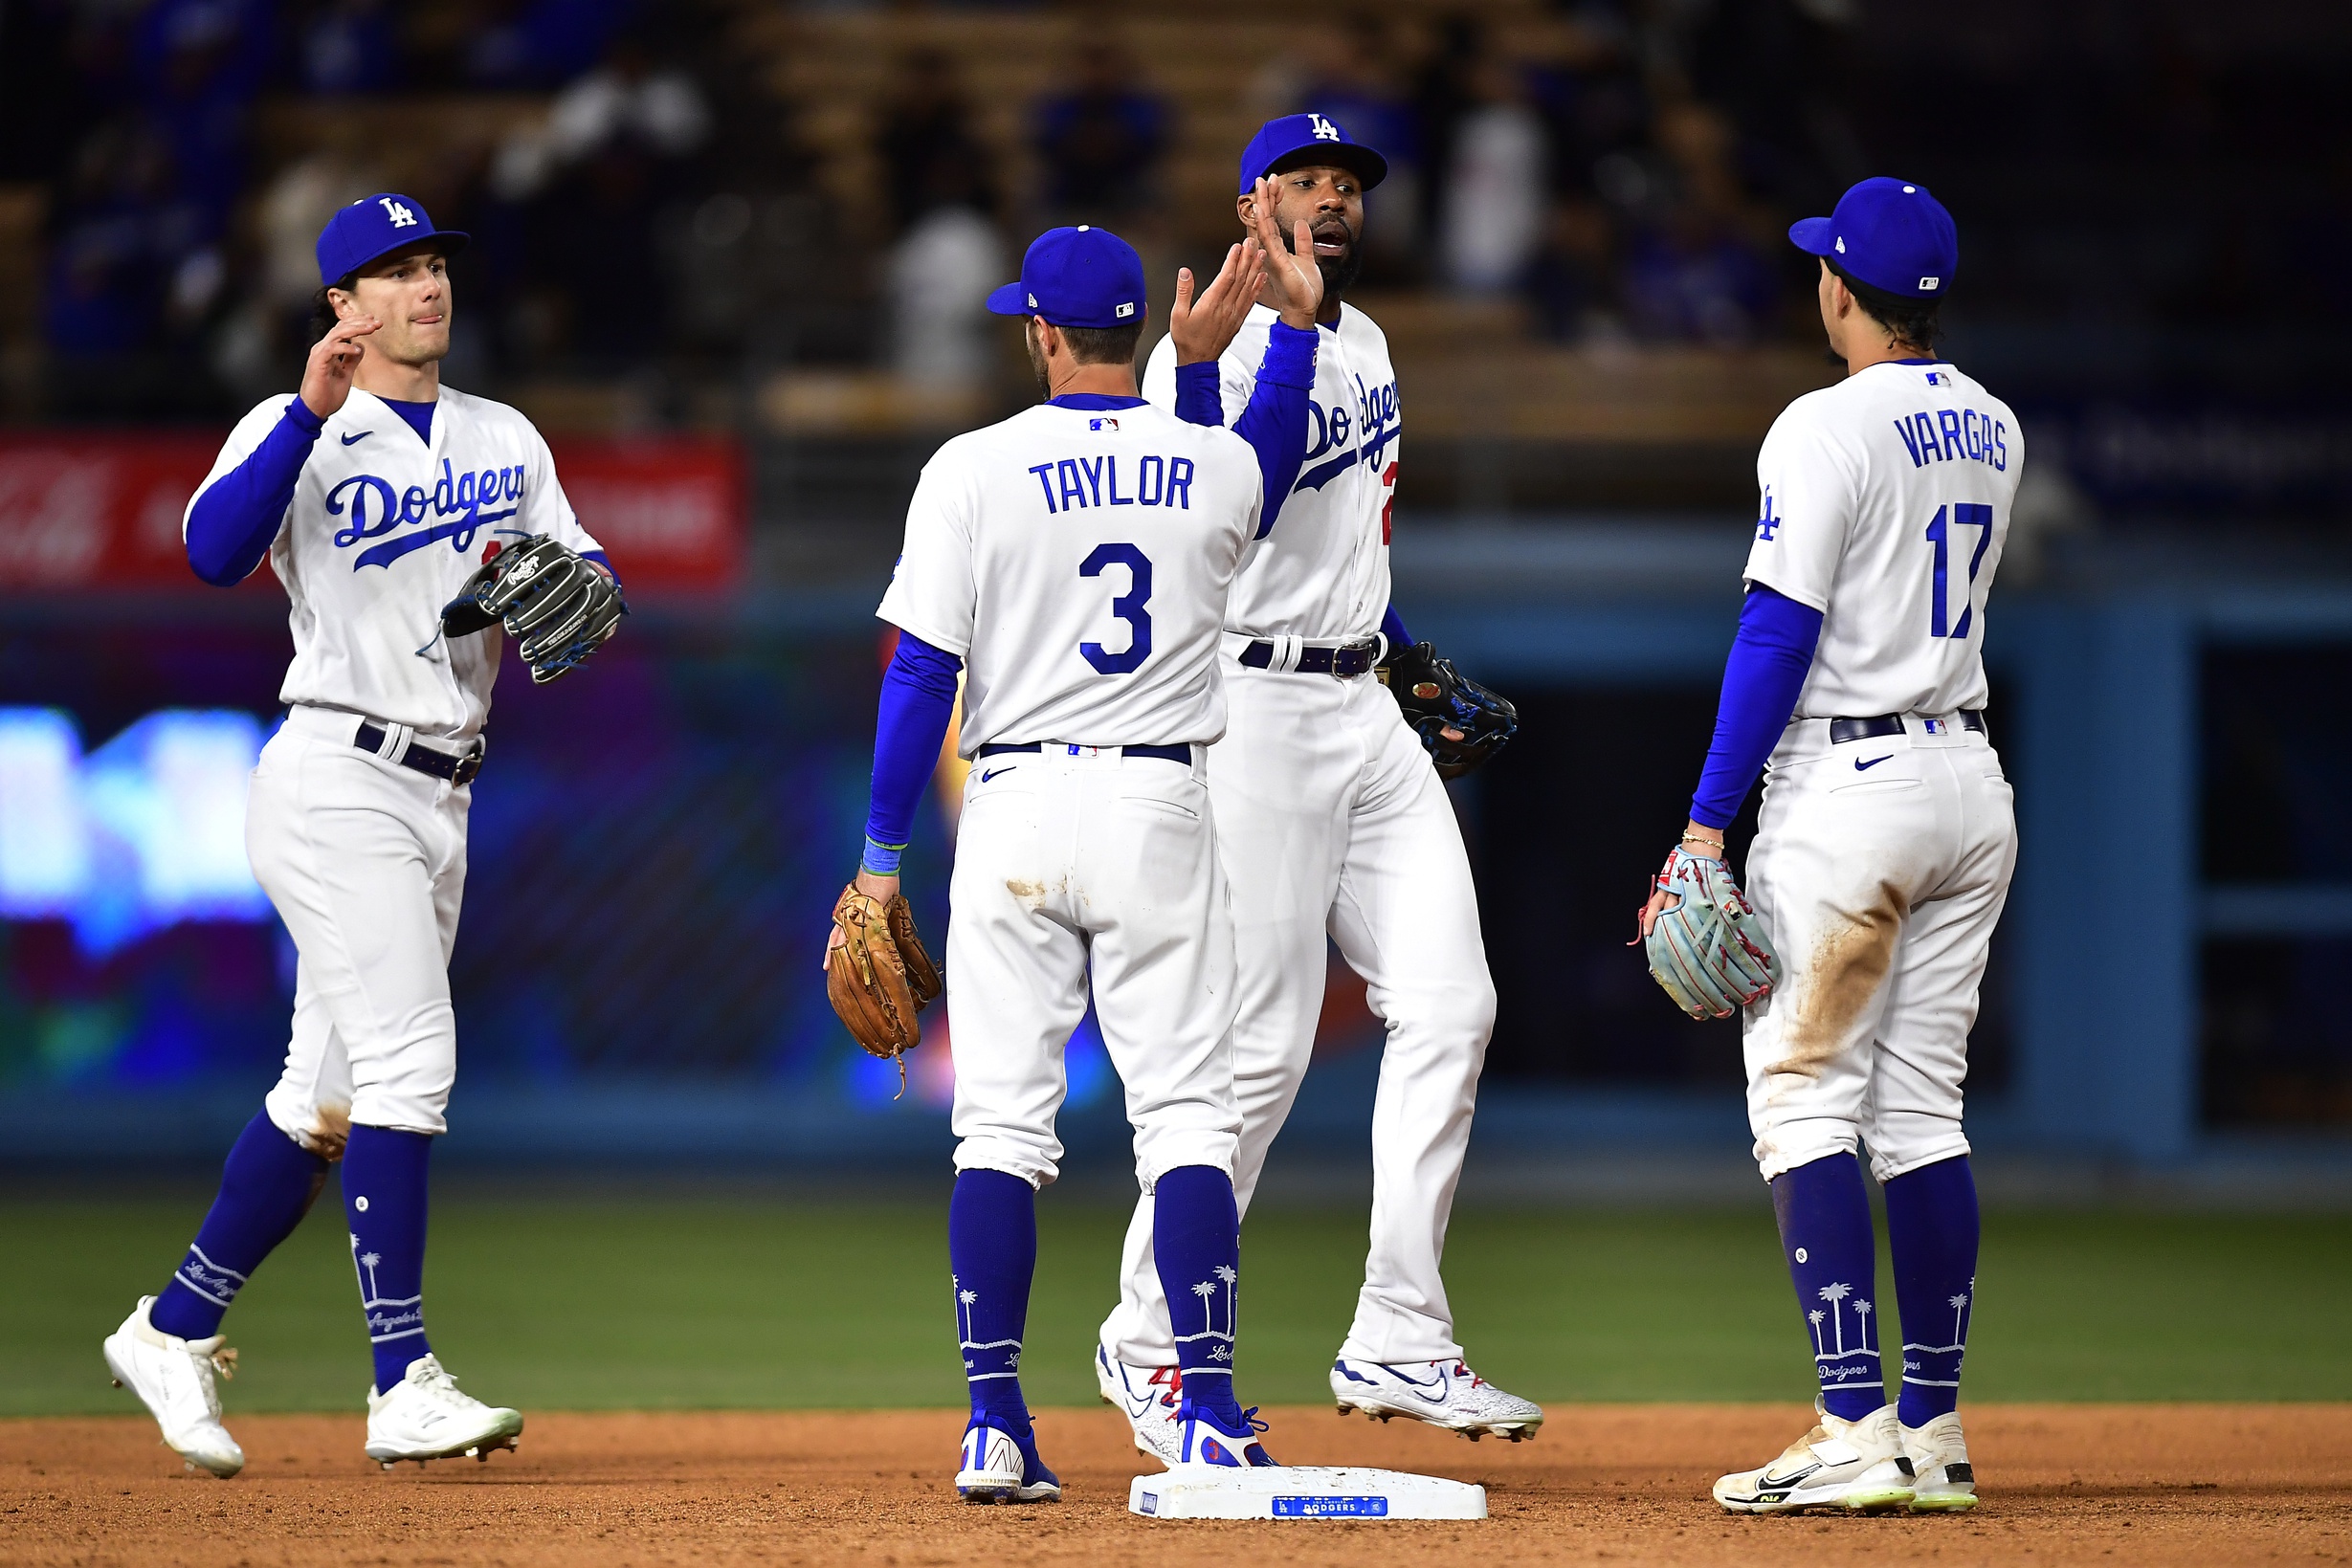 Dodgers Notes: LA Wins Heading into Off Day, Muncy & Heyward Showcase,  Injury Updates & More